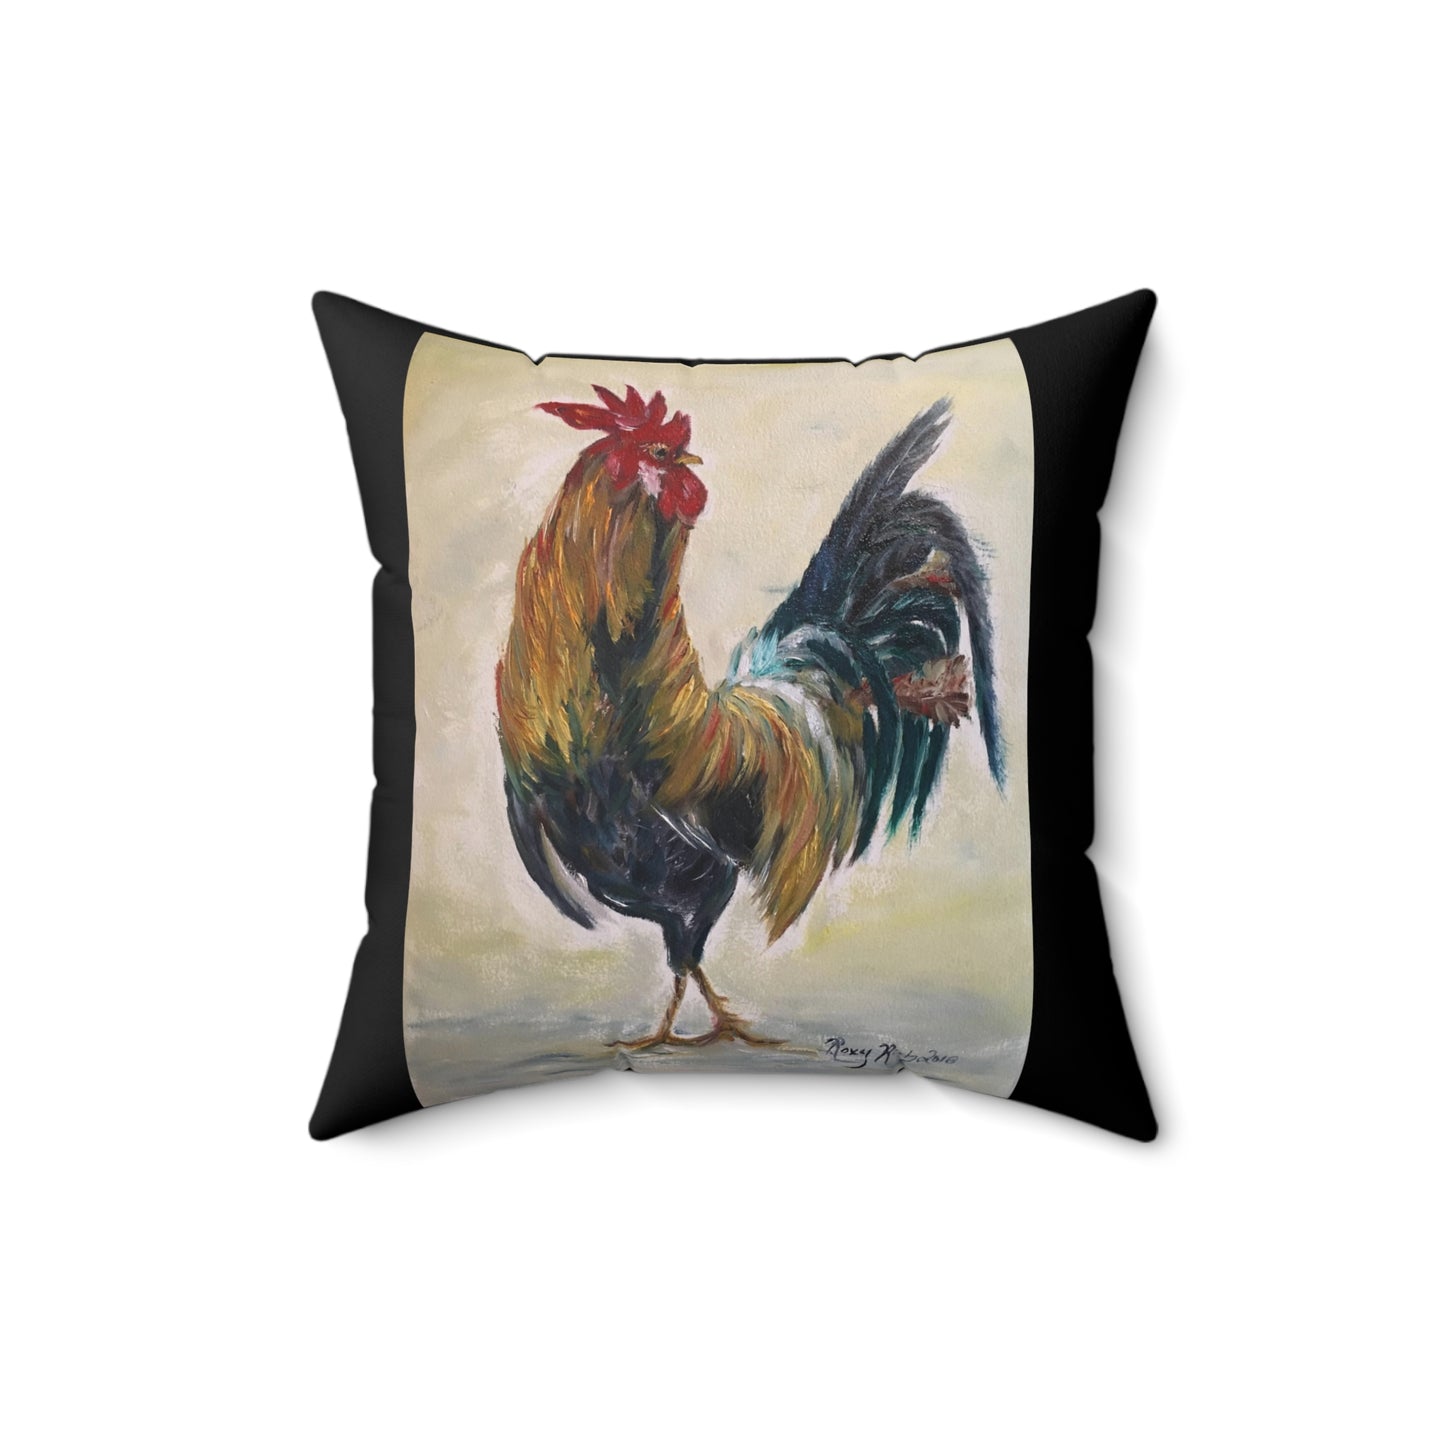 Rooster (Who you Calling Chicken?) Black Background Indoor Spun Polyester Square Pillow